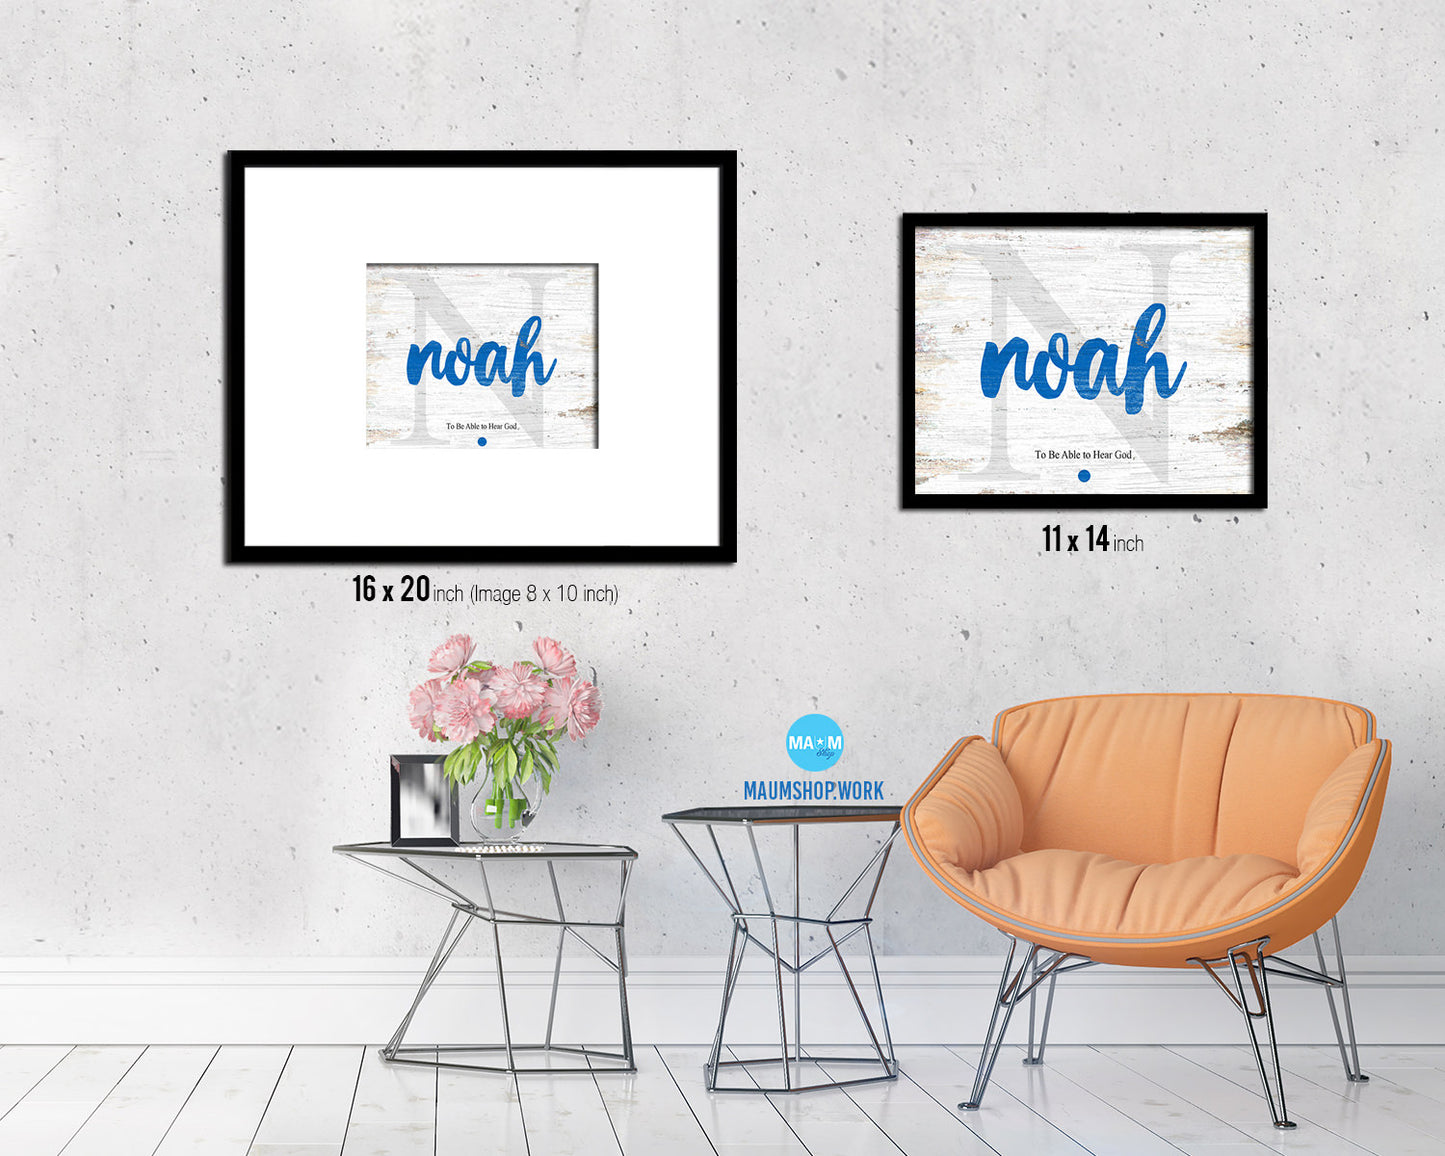 Noah Personalized Biblical Name Plate Art Framed Print Kids Baby Room Wall Decor Gifts